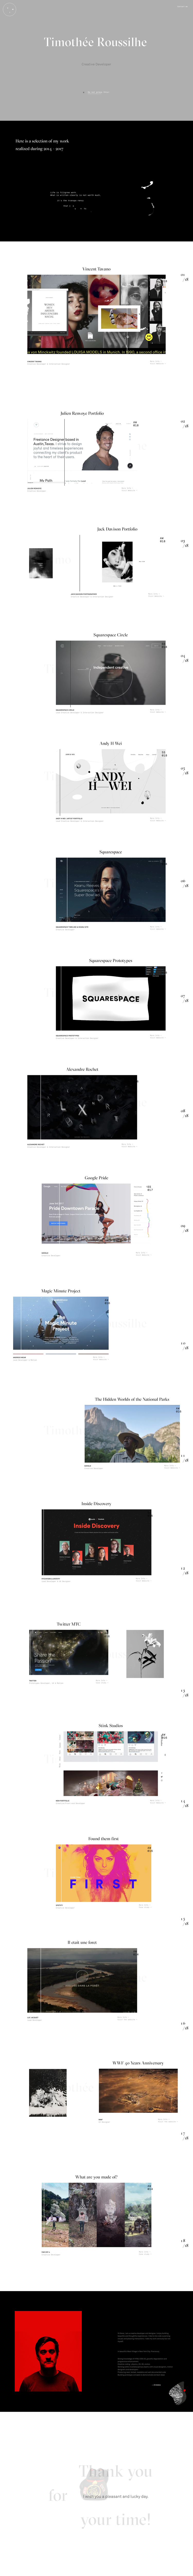 Tim Roussilhe Landing Page Example: I am a creative developer and designer, I enjoy building beautiful and thoughtful experiences. I like to mix code surprising visuals and pleasing interactions.